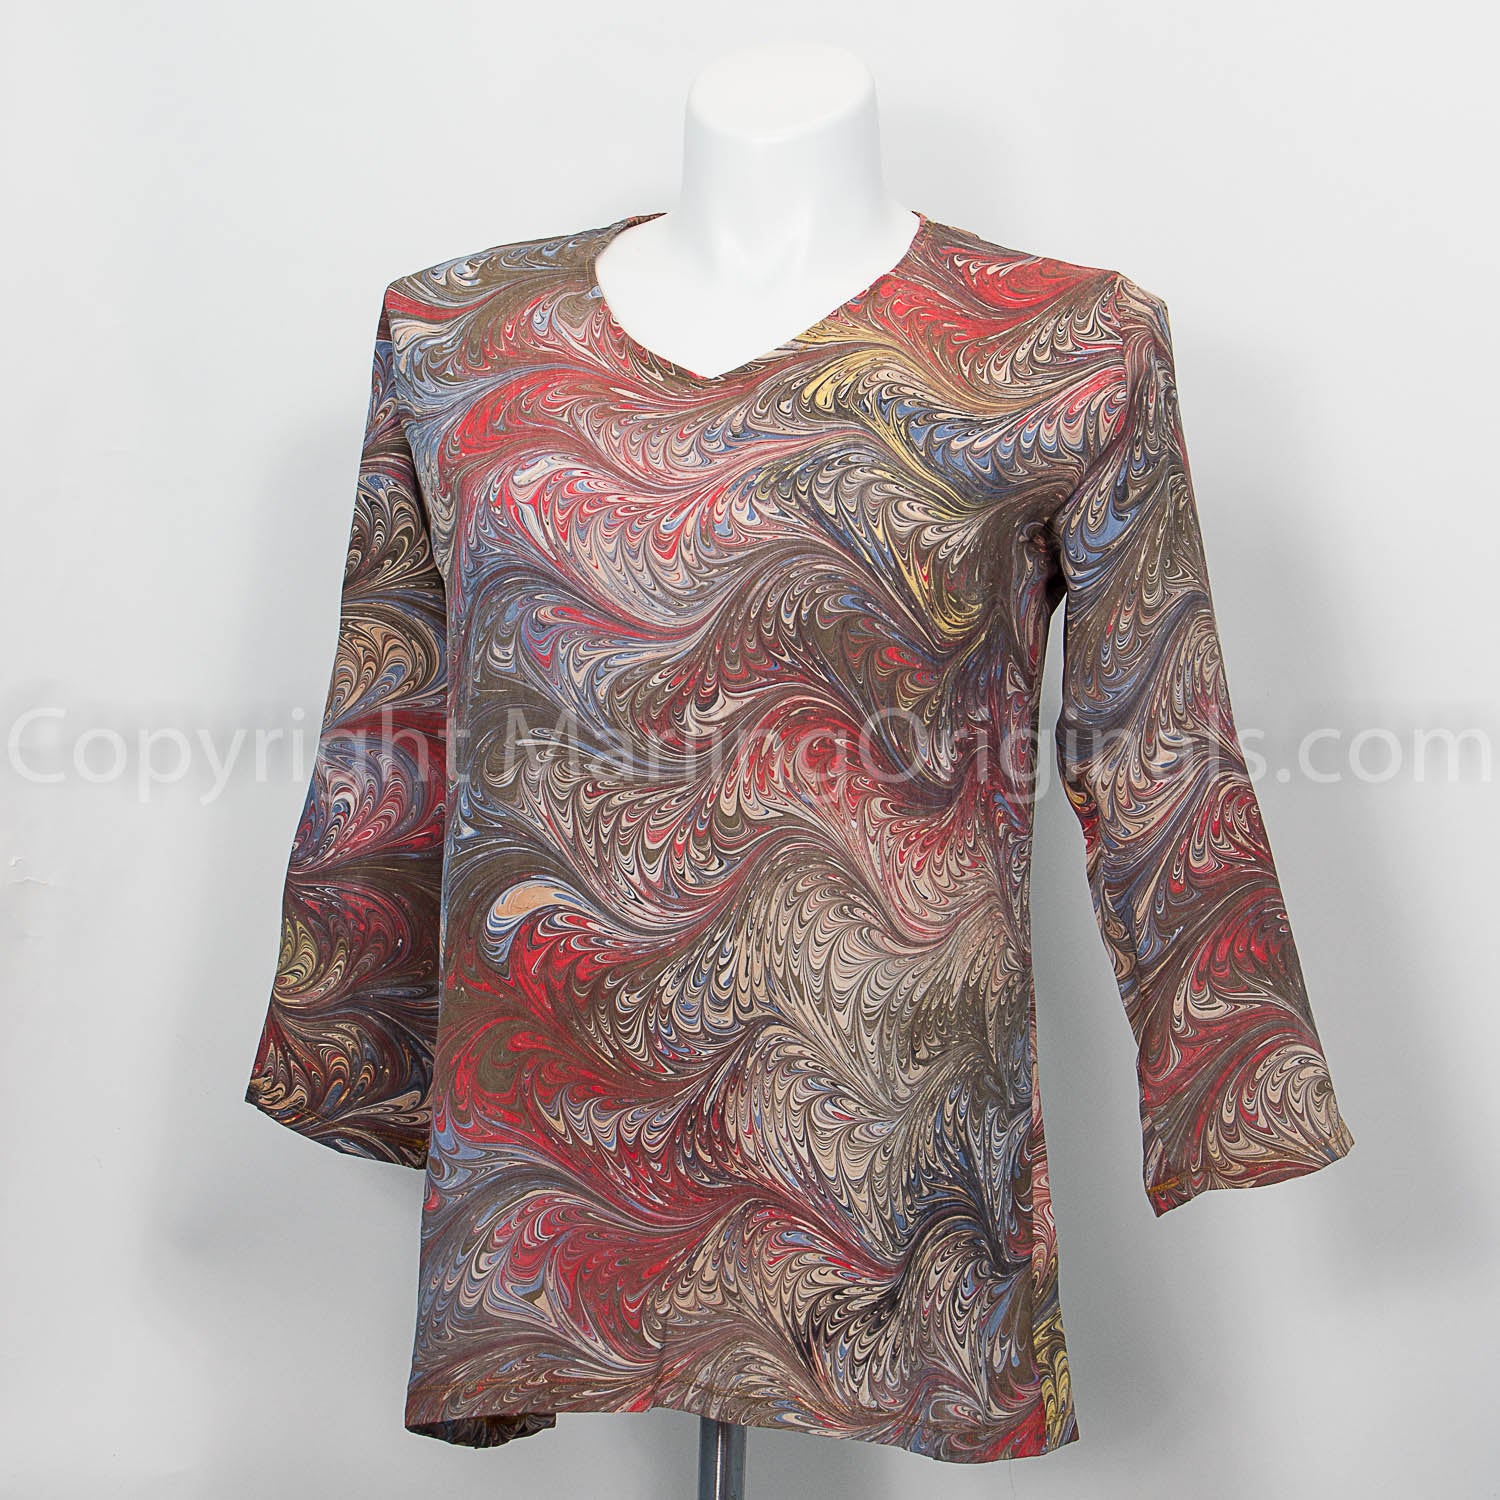 v neck tunic length top with 3/4 sleeves marbled in shades of brown with red